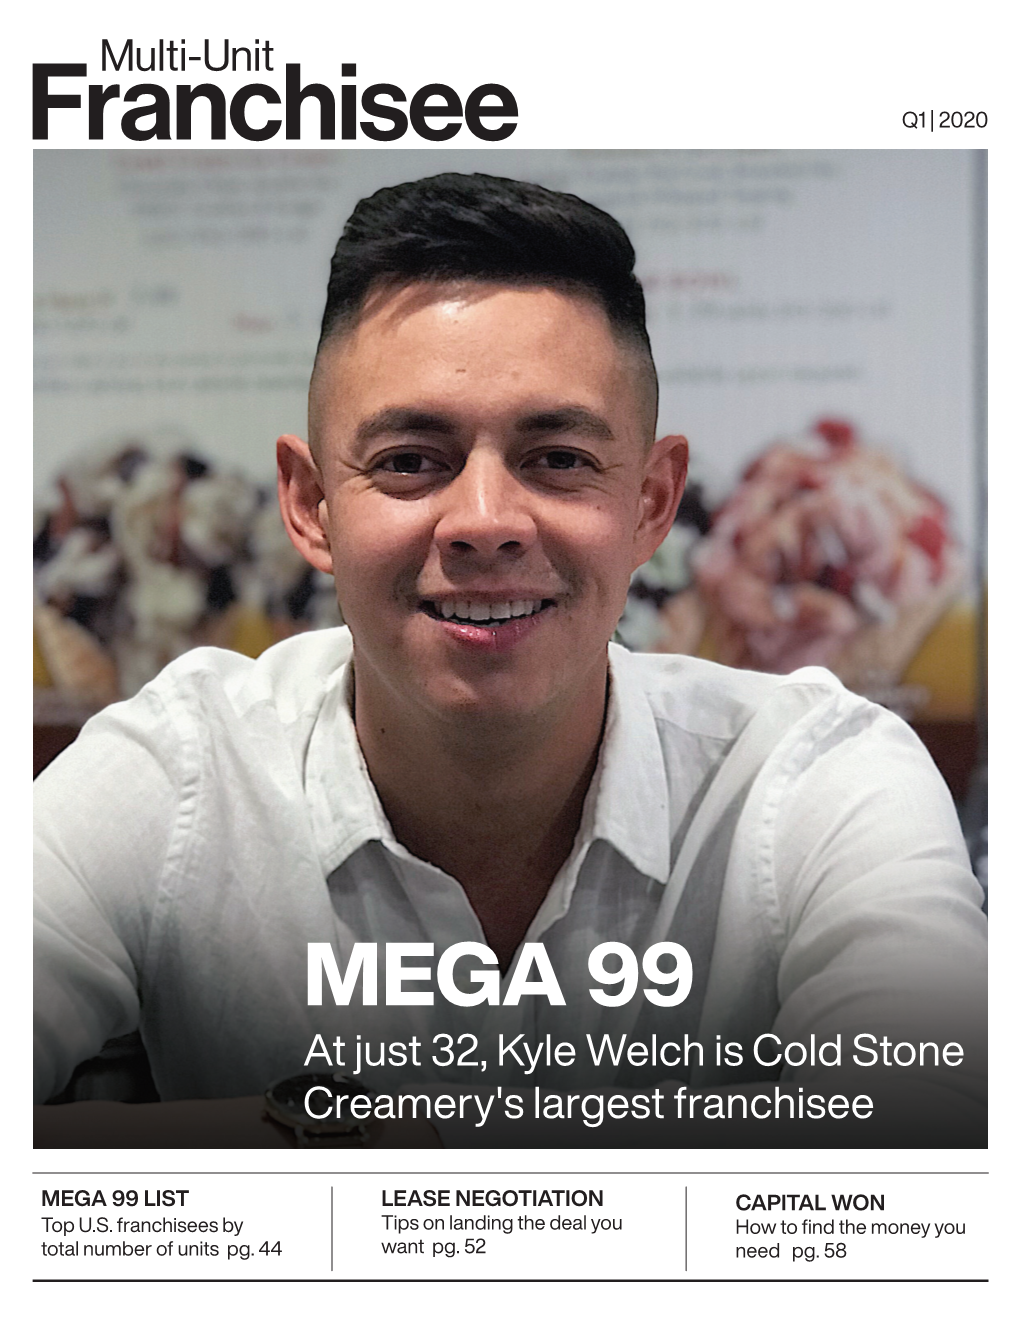 MEGA 99 at Just 32, Kyle Welch Is Cold Stone Creamery's Largest Franchisee